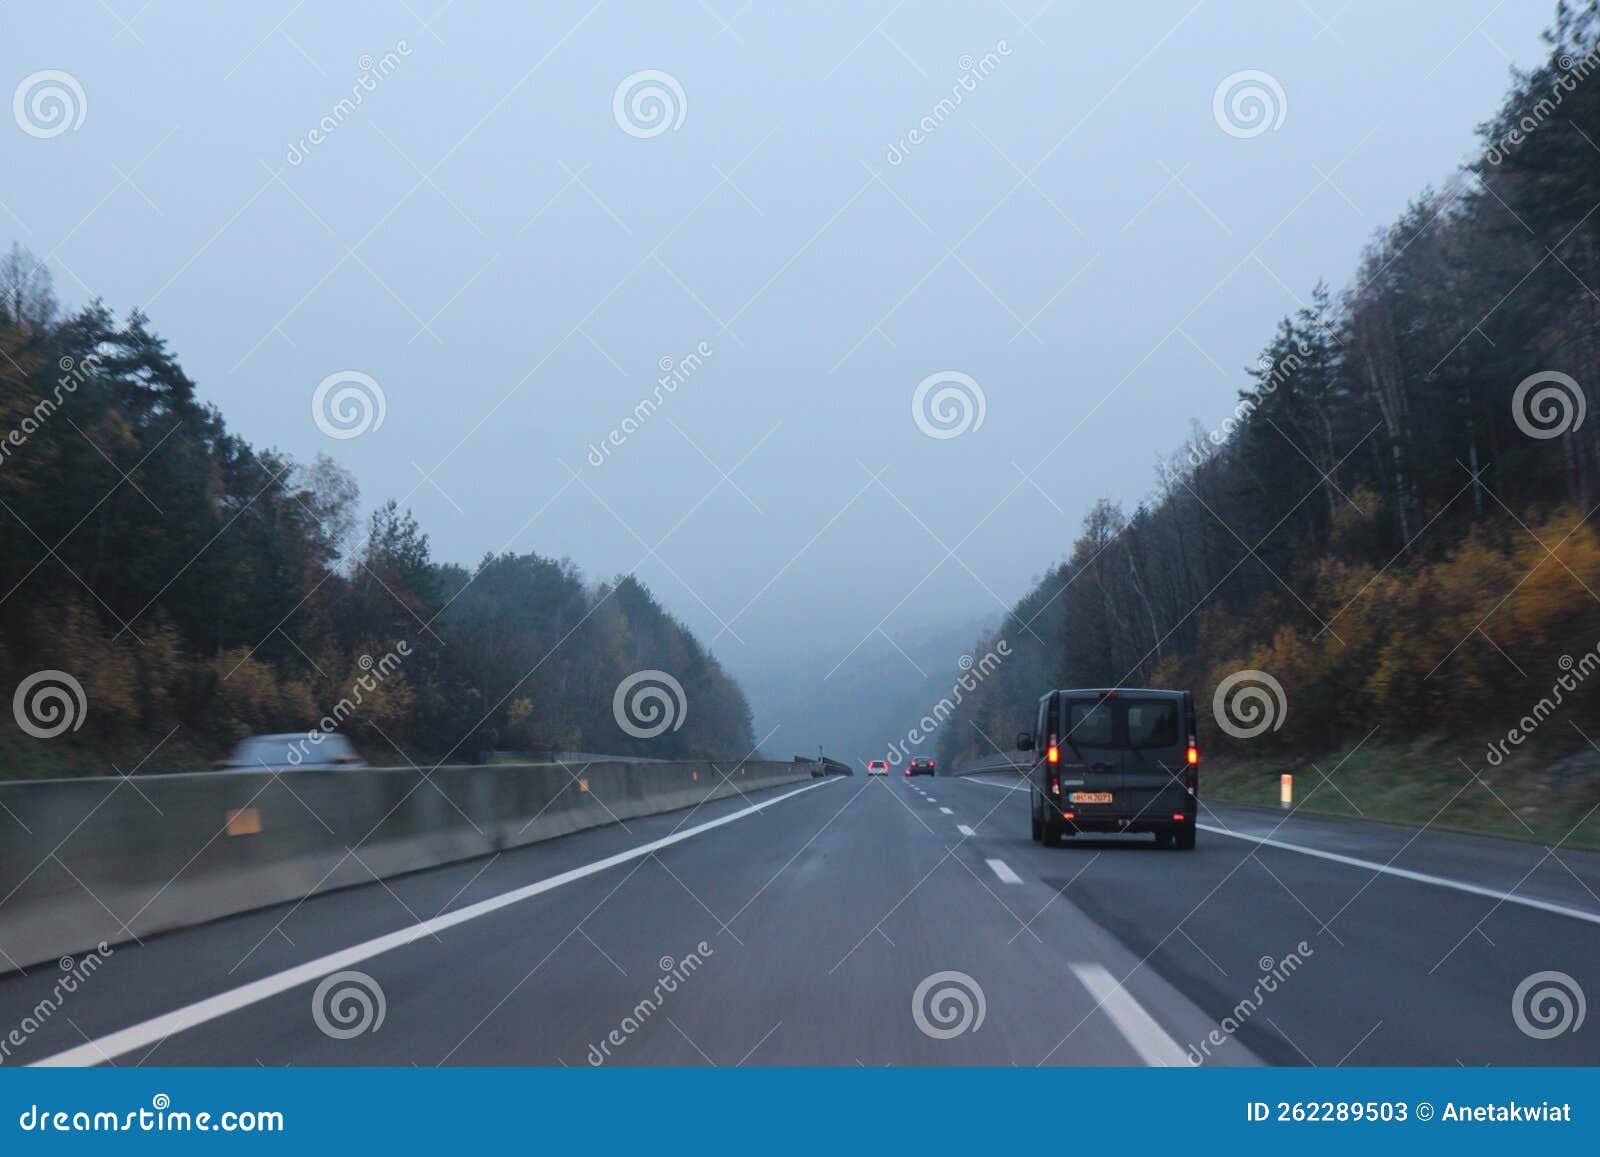 car traffic on higway with fog and autumn forest on sides